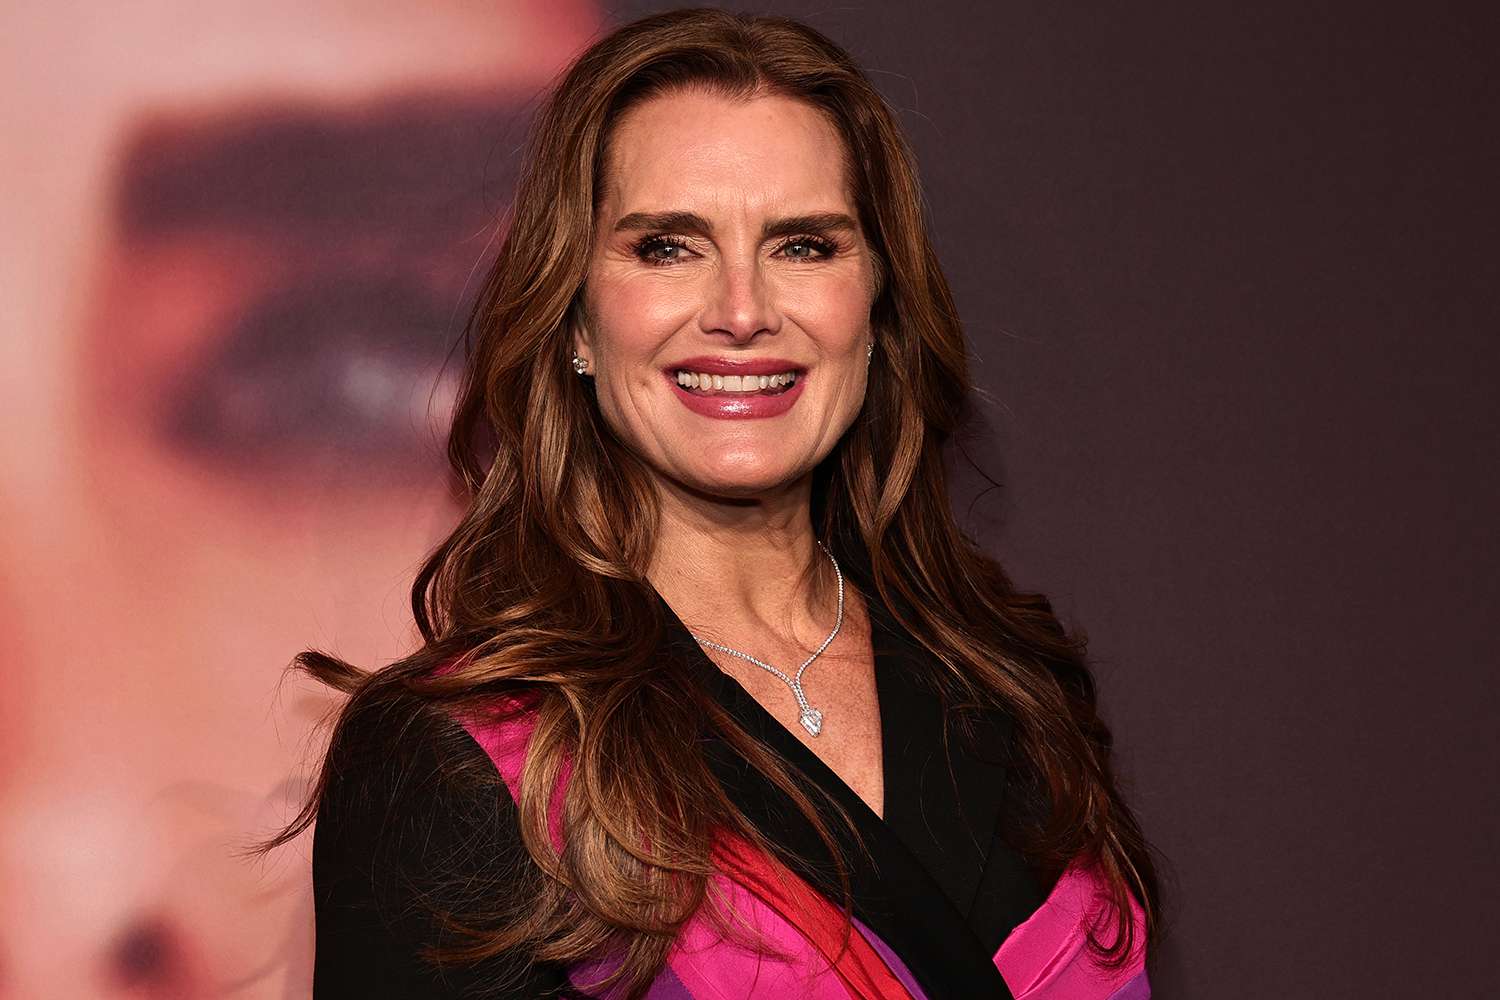 Brooke Shields Says ‘You’re Never Relieved’ as a Parent and There Are Always ‘New Worries’ (Exclusive)